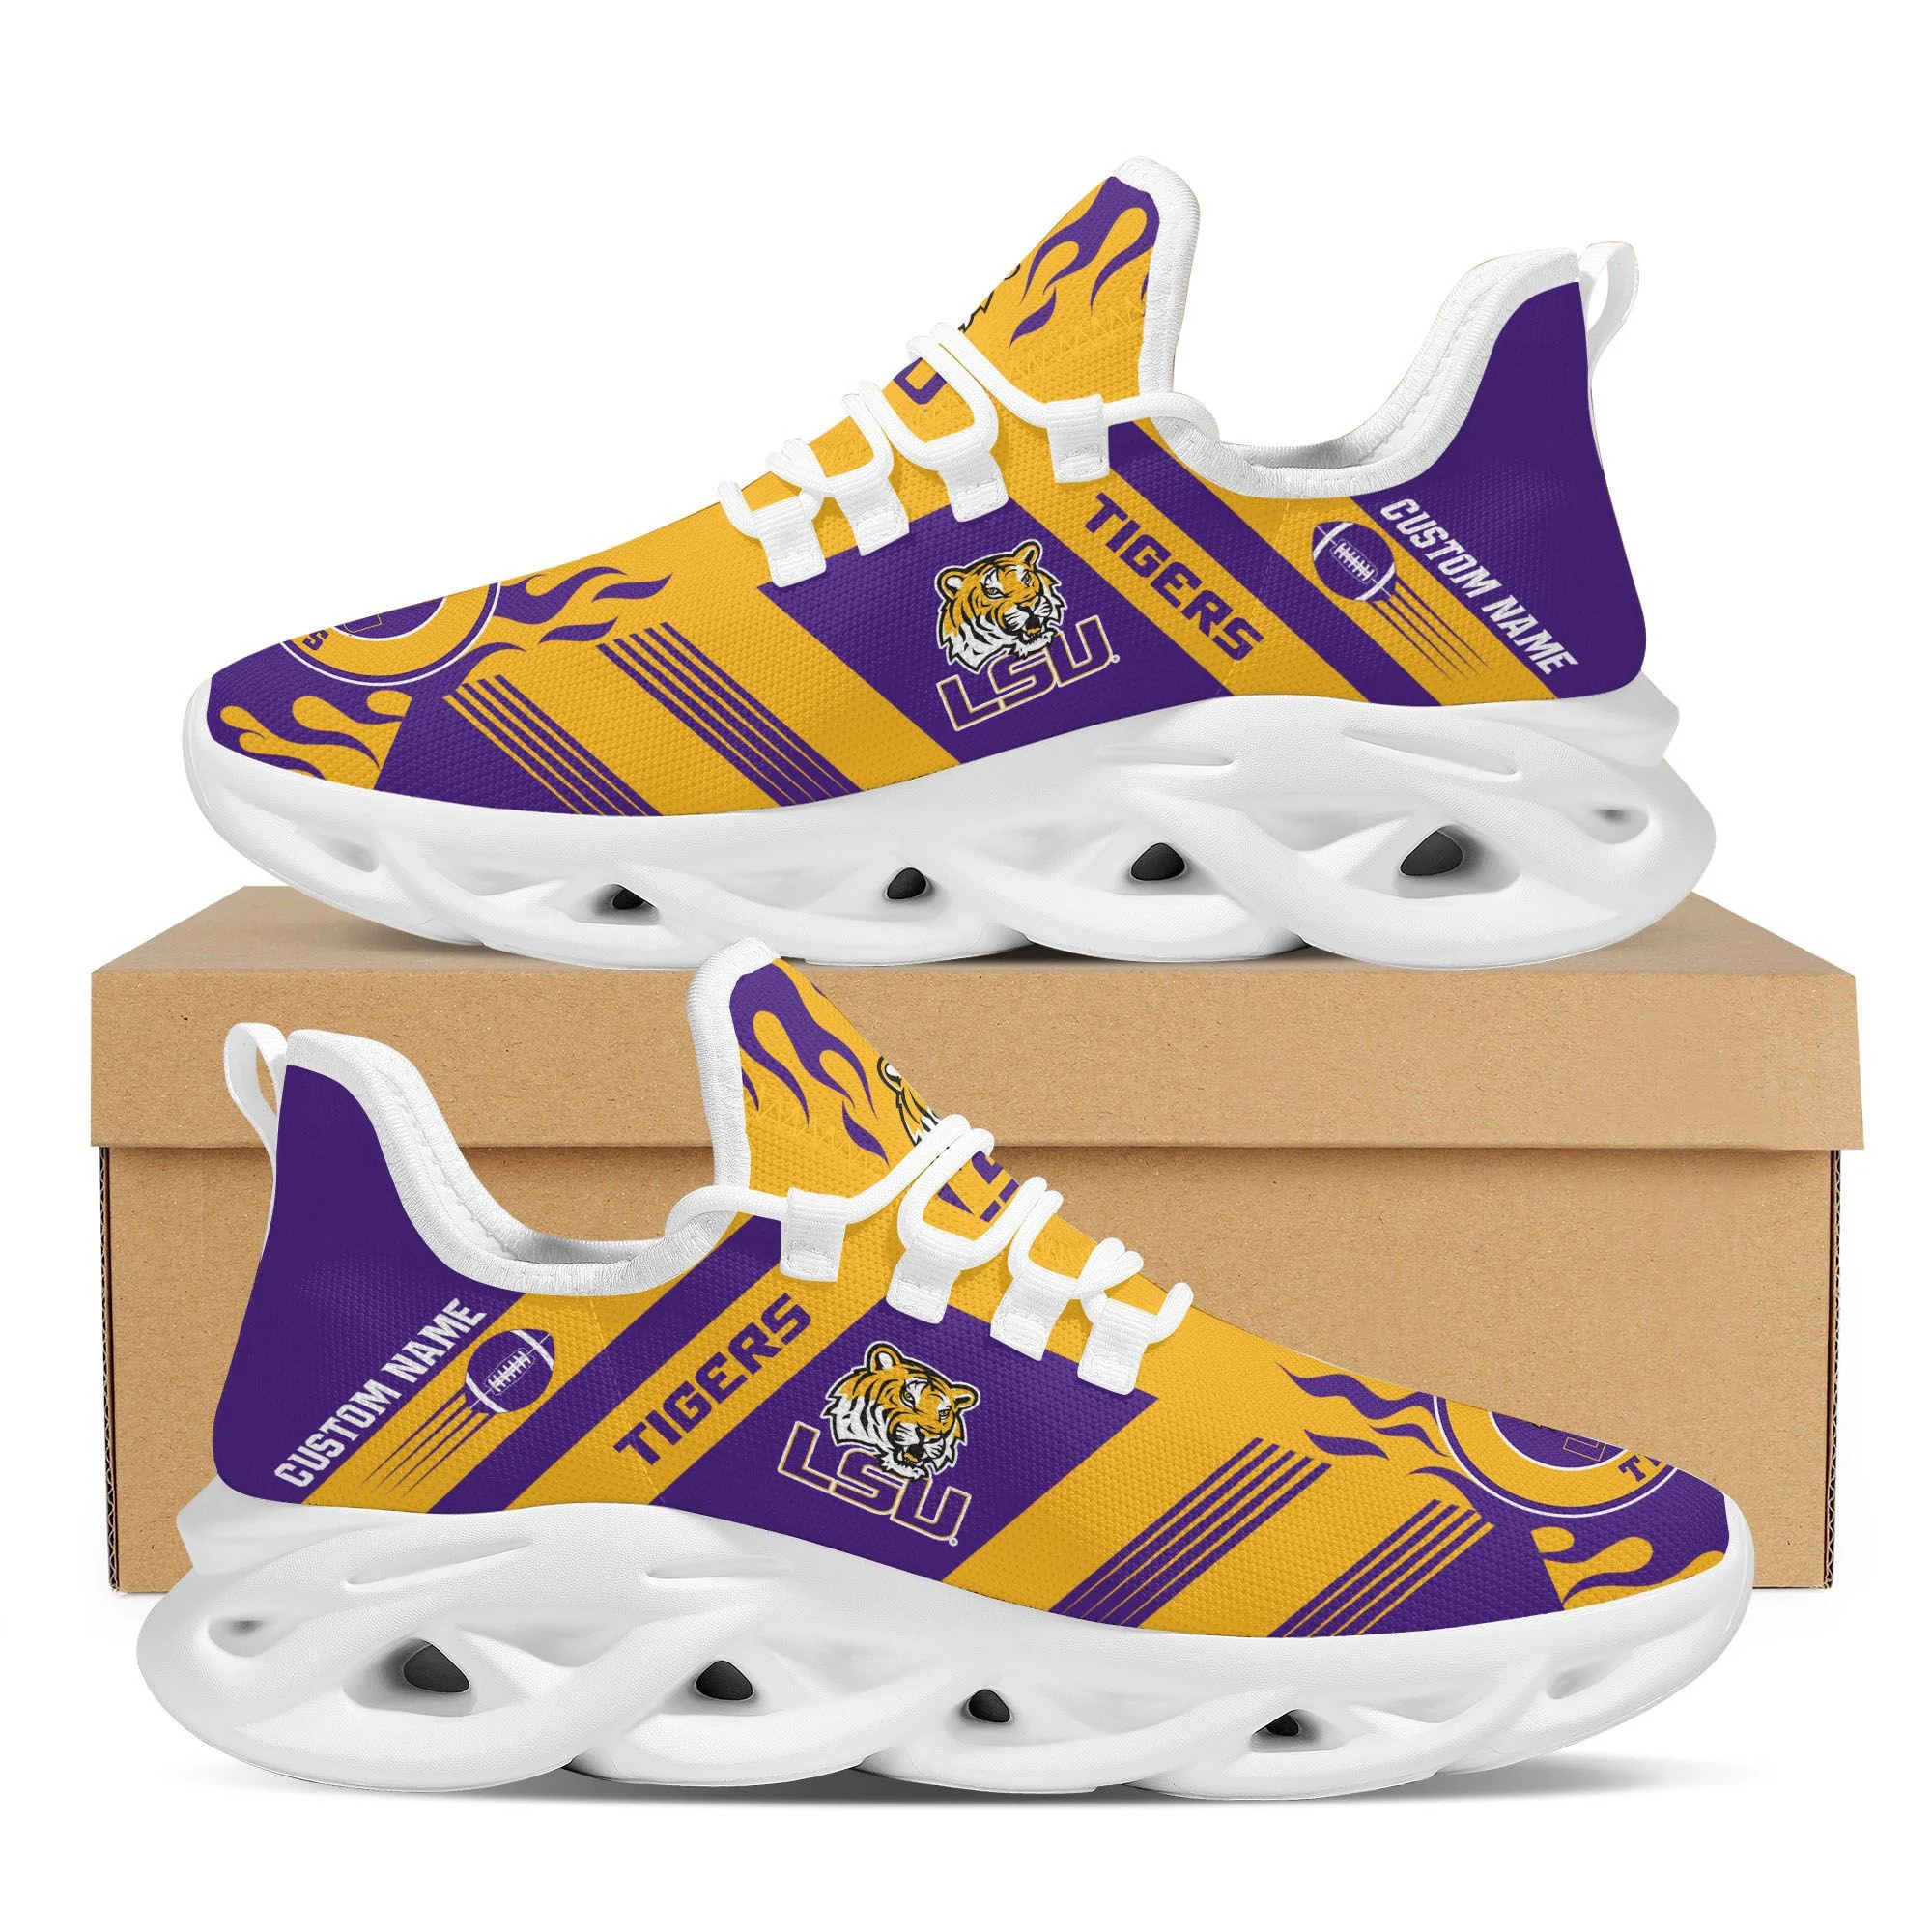 Lsu Tigers Personalized Yezy Running Sneakers Bb605 – PoshmarkStore